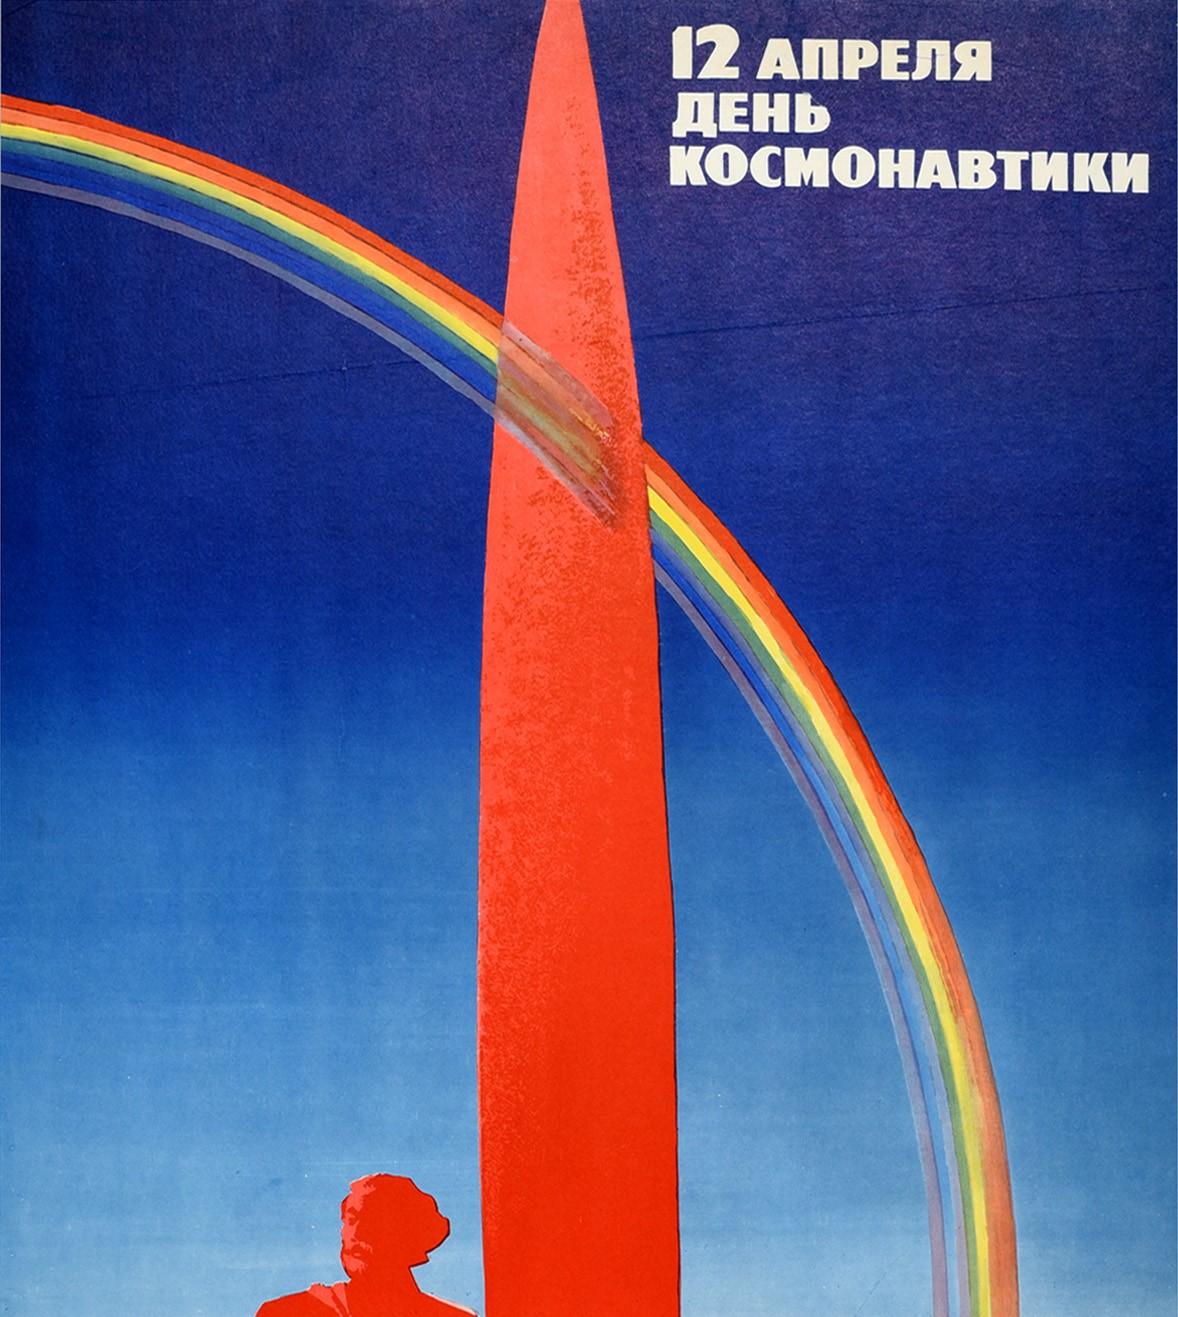 Original vintage Soviet space propaganda poster for 12 ?????? ???? ???????????? 12 April Cosmonautics Day featuring a rocket and statue in shades of red behind an image of the Soviet pilot and cosmonaut who was the first man in space on 12 April